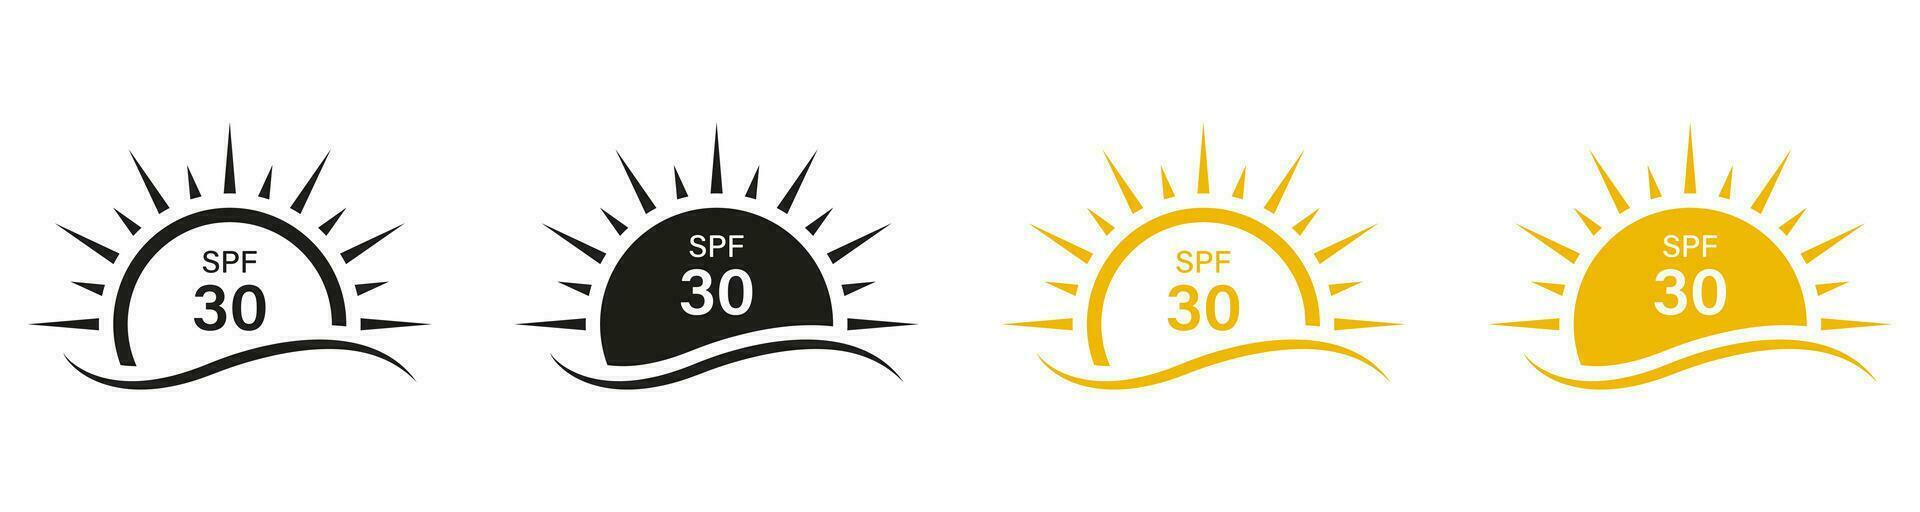 SPF 30 Sunblock Lotion Labels. Block Solar Radiation, Anti Ultraviolet Rays Symbol Collection. Sunscreen Protect Icons. UV Skin Protection Cream Pictogram Set. Isolated Vector Illustration.